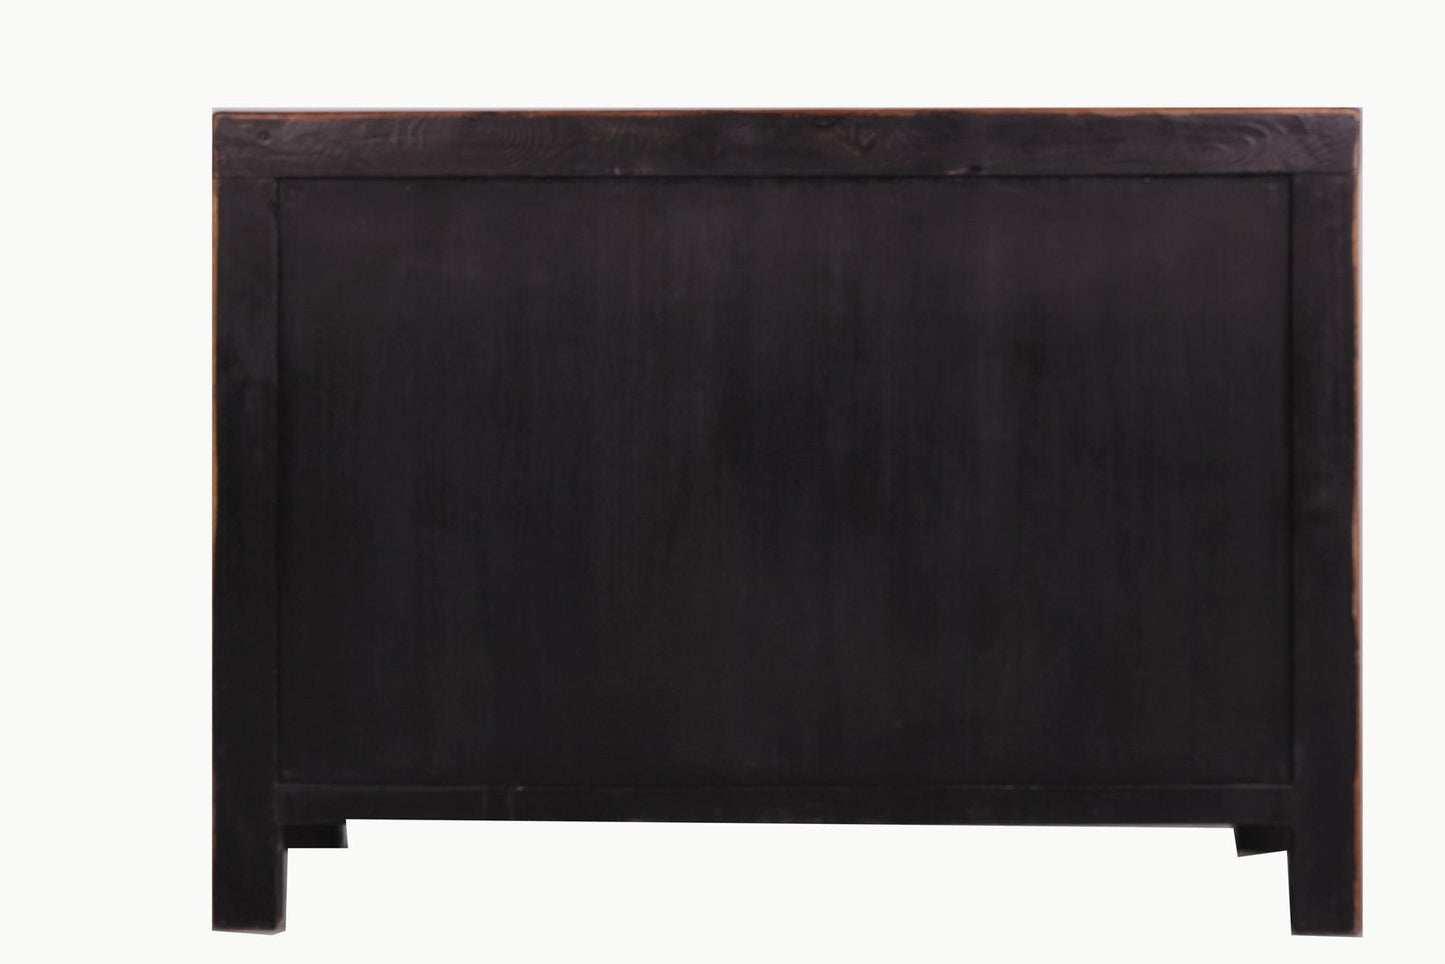 Chinese chest of drawers sideboard shelf "Fire" - Art. 33082-7